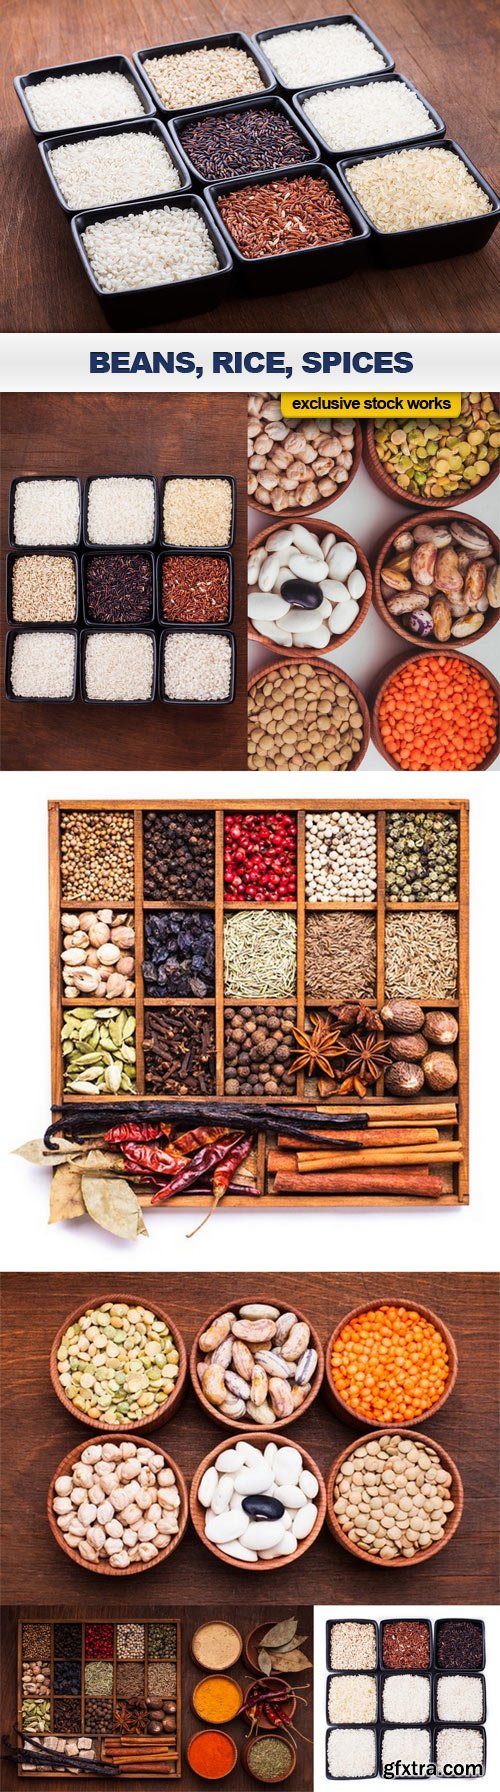 Beans, Rice, Spices - 7 UHQ JPEG